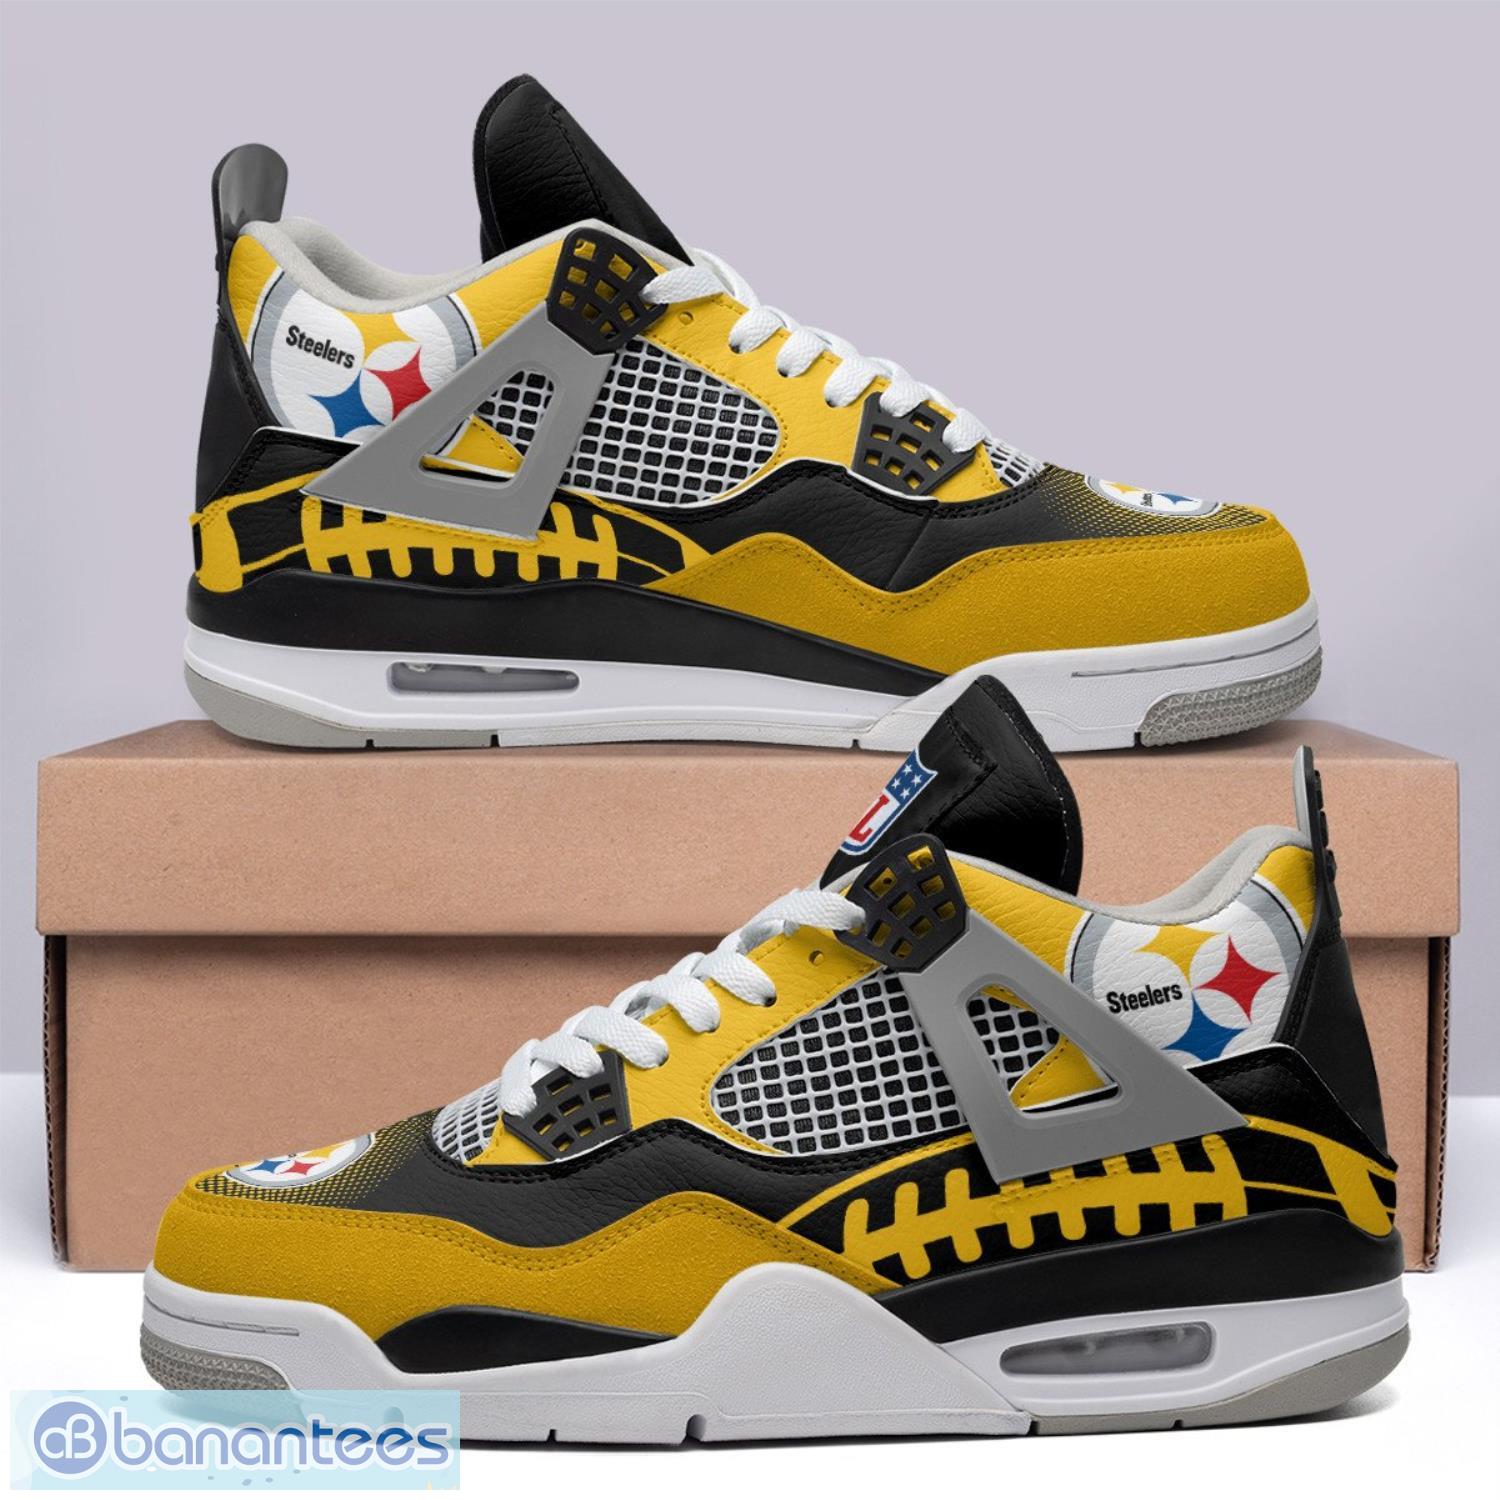 smog konsol mineral Pittsburgh Steelers Personalized Air Jordan 4 Sneakers Shoes Limited For  Fans - Banantees